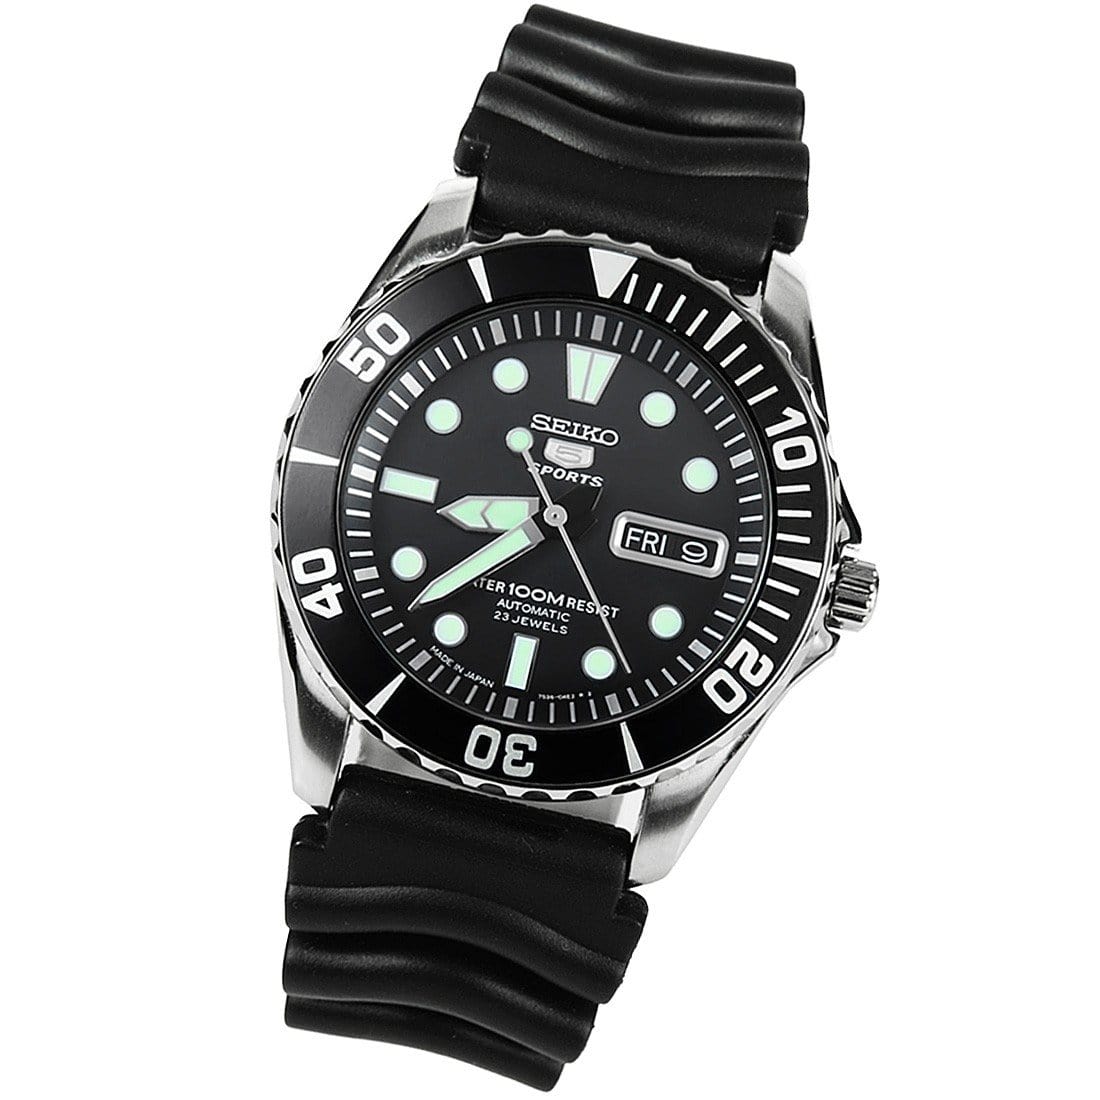 Seiko 5 Sports Automatic Watch SNZF17J SNZF17J2 with Addt'l Band